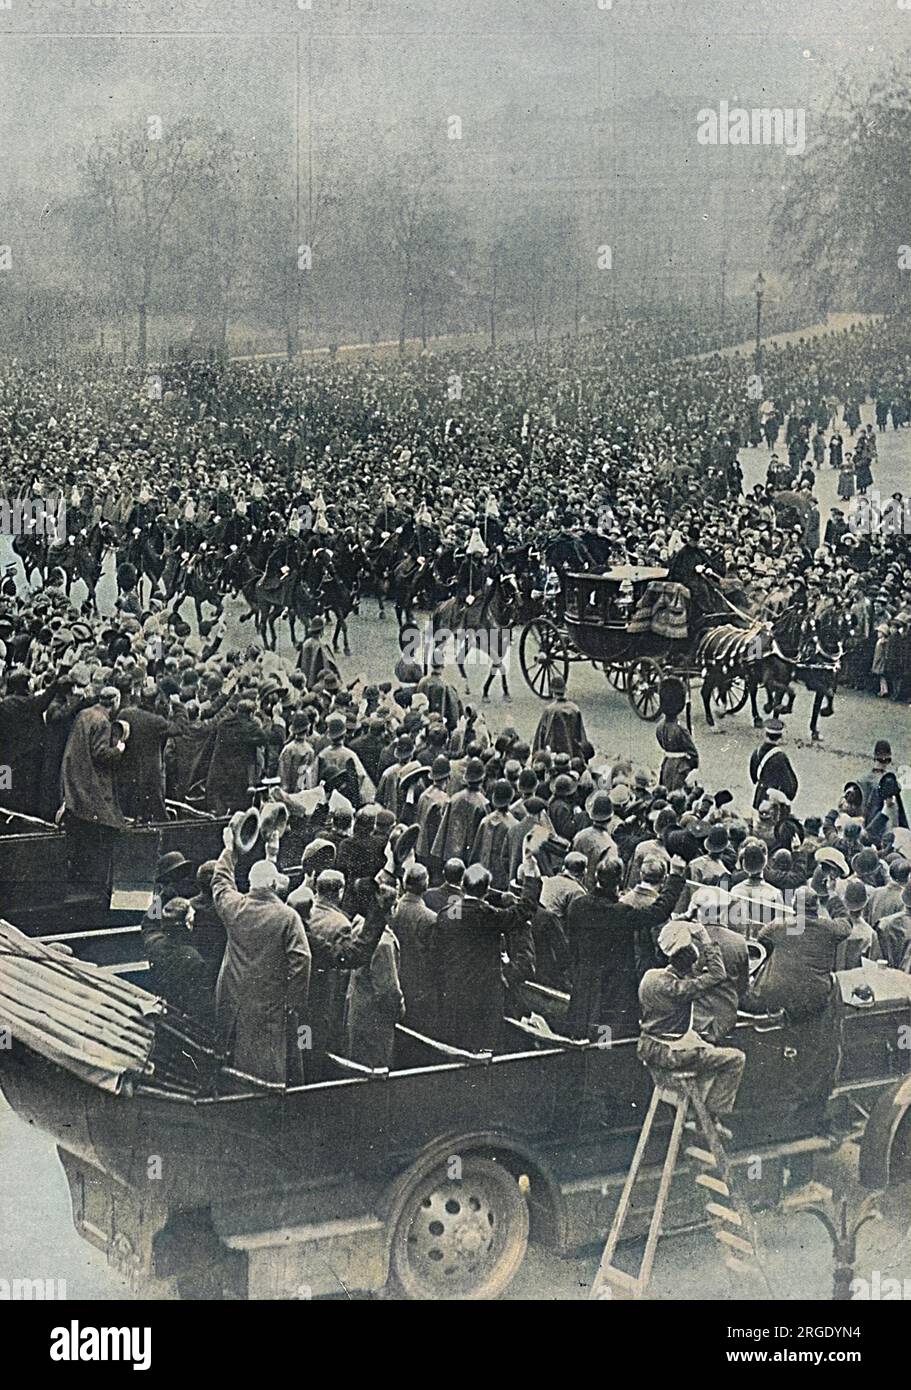 Vast crowds in Horse Guards' Parade watching the bridegroom, Prince Albert, Duke of York and his brothers, the Prince of Wales and Prince Henry (Duke of Gloucester) driving in procession to Westminster Abbey for the Duke of York's marriage to Lady Elizabeth Bowes-Lyon in April 1923. Stock Photo